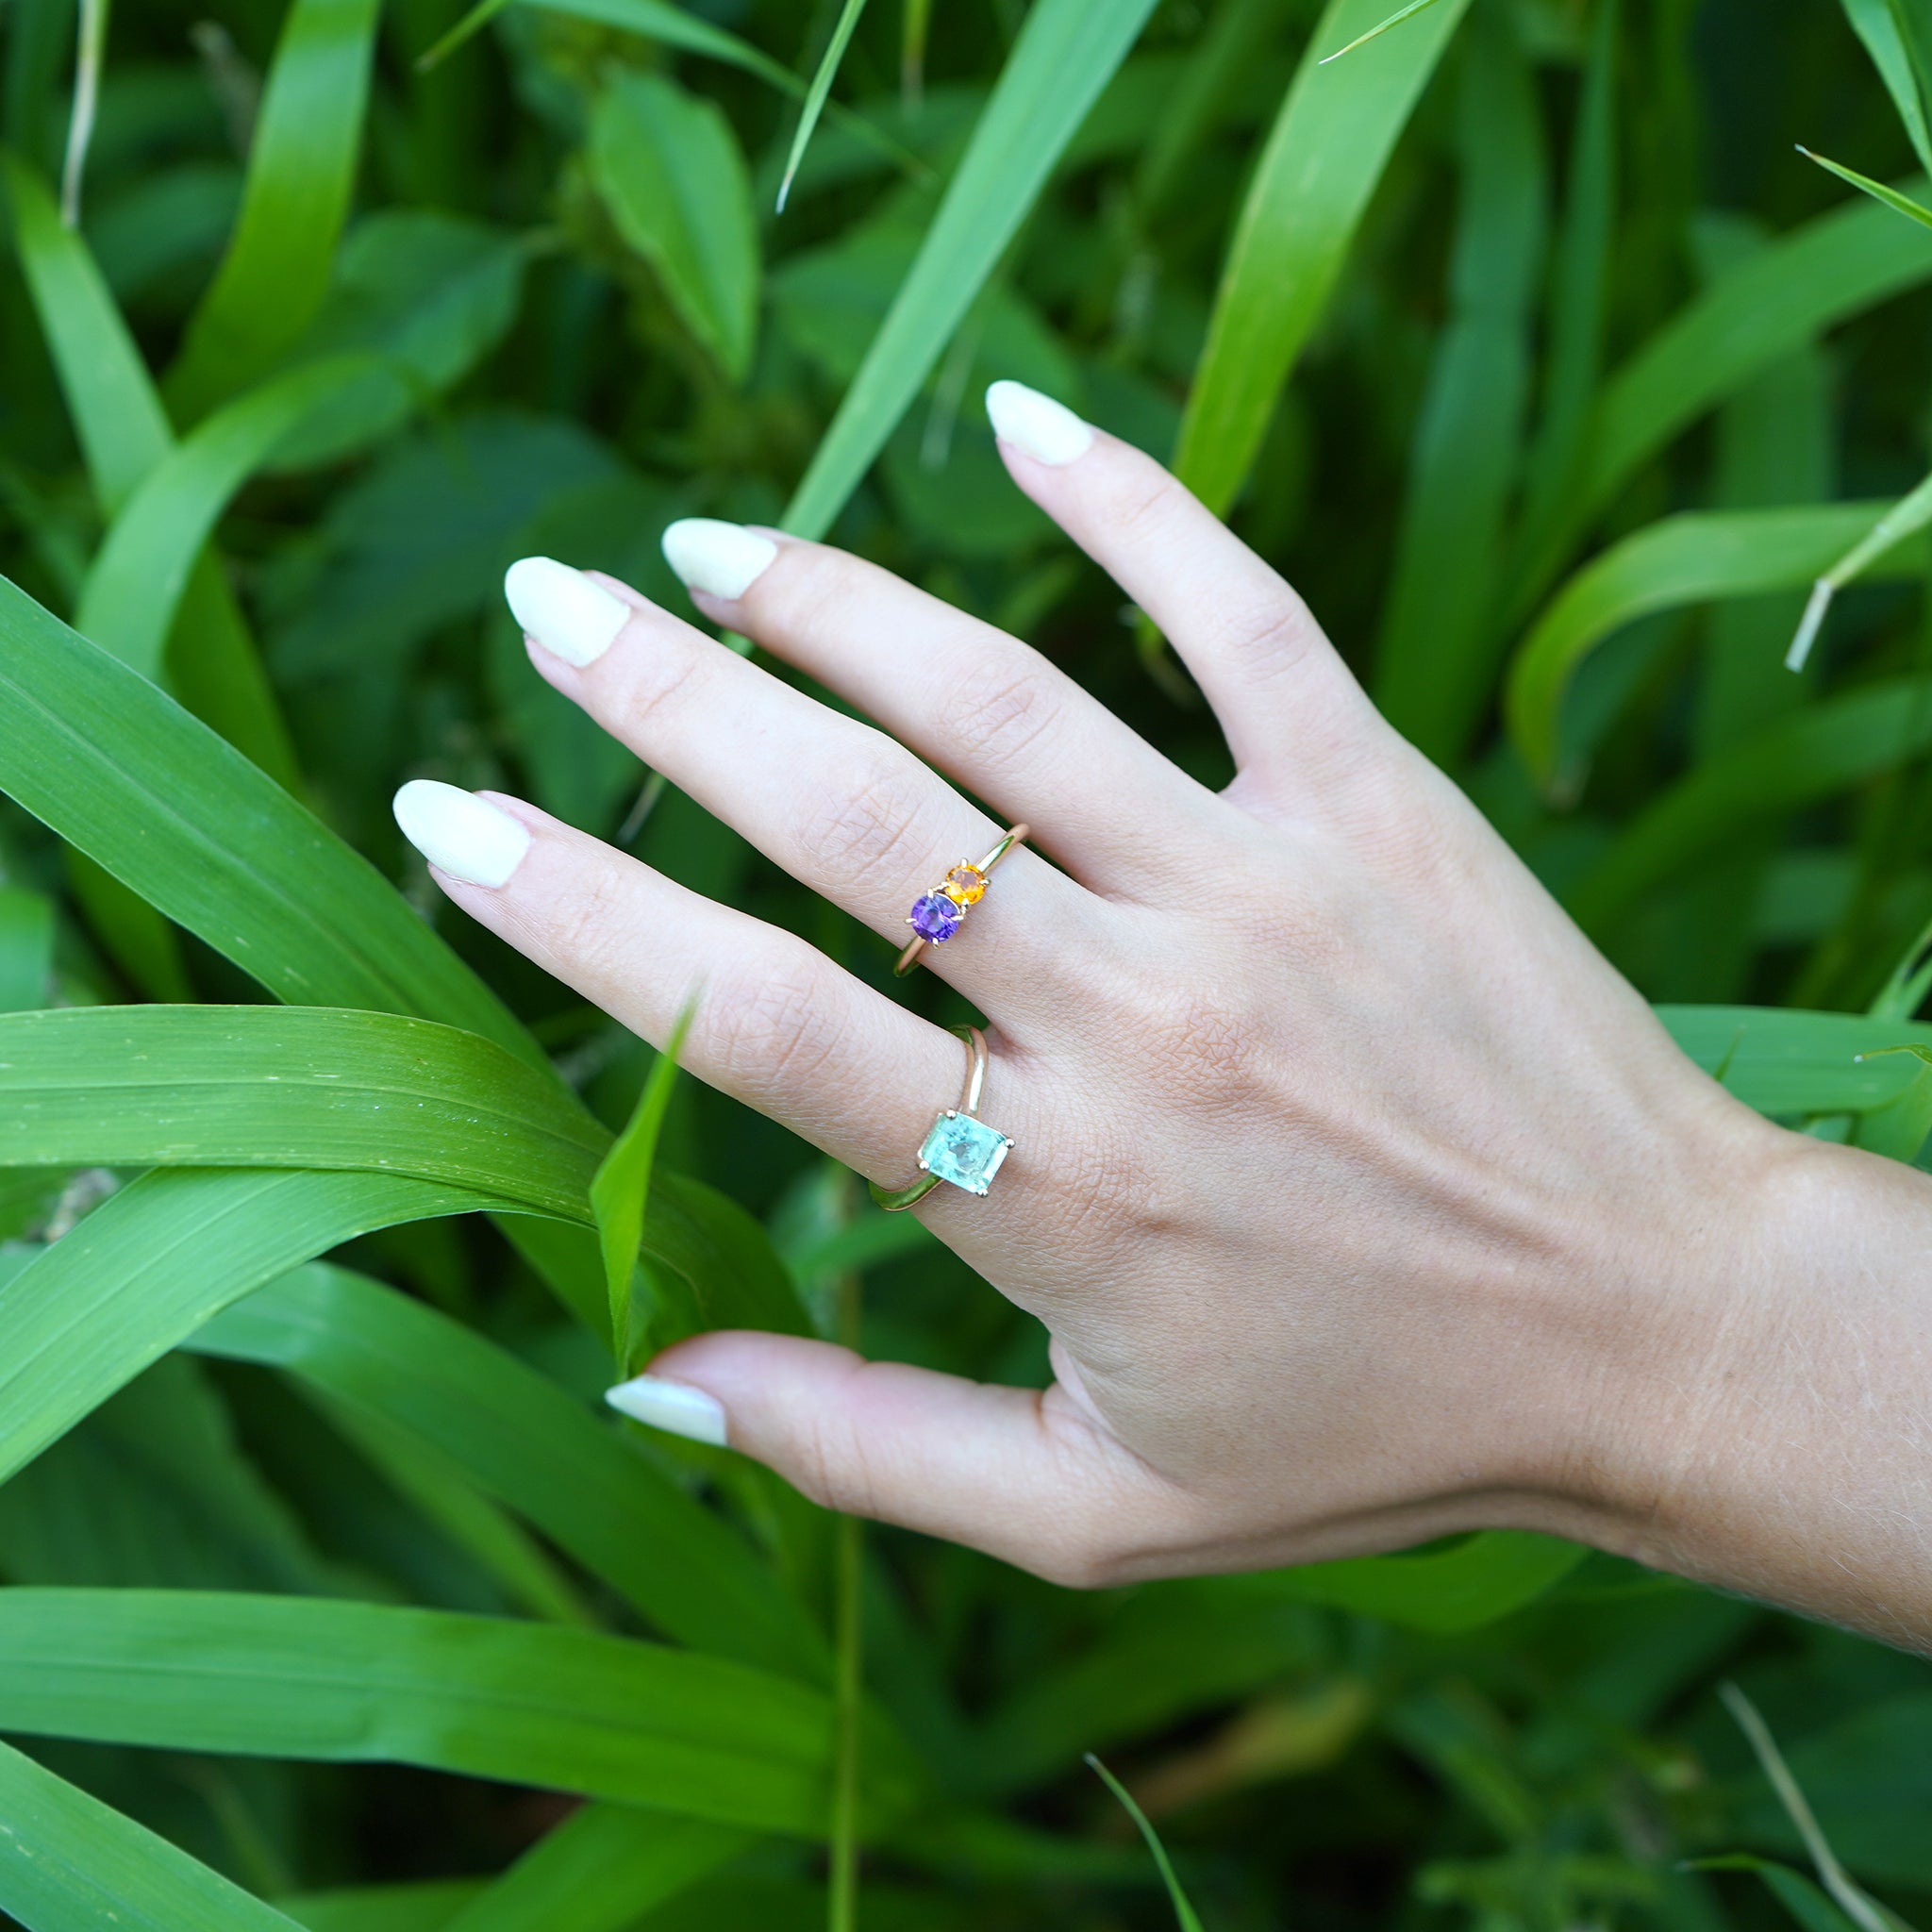 Woman showing off her stylish layered ring look featuring the Iris Flower Ring in solid 14k yellow gold with genuine amethyst and citrine from Lico Jewelry Montreal paired with other rings, set against a background of green plants